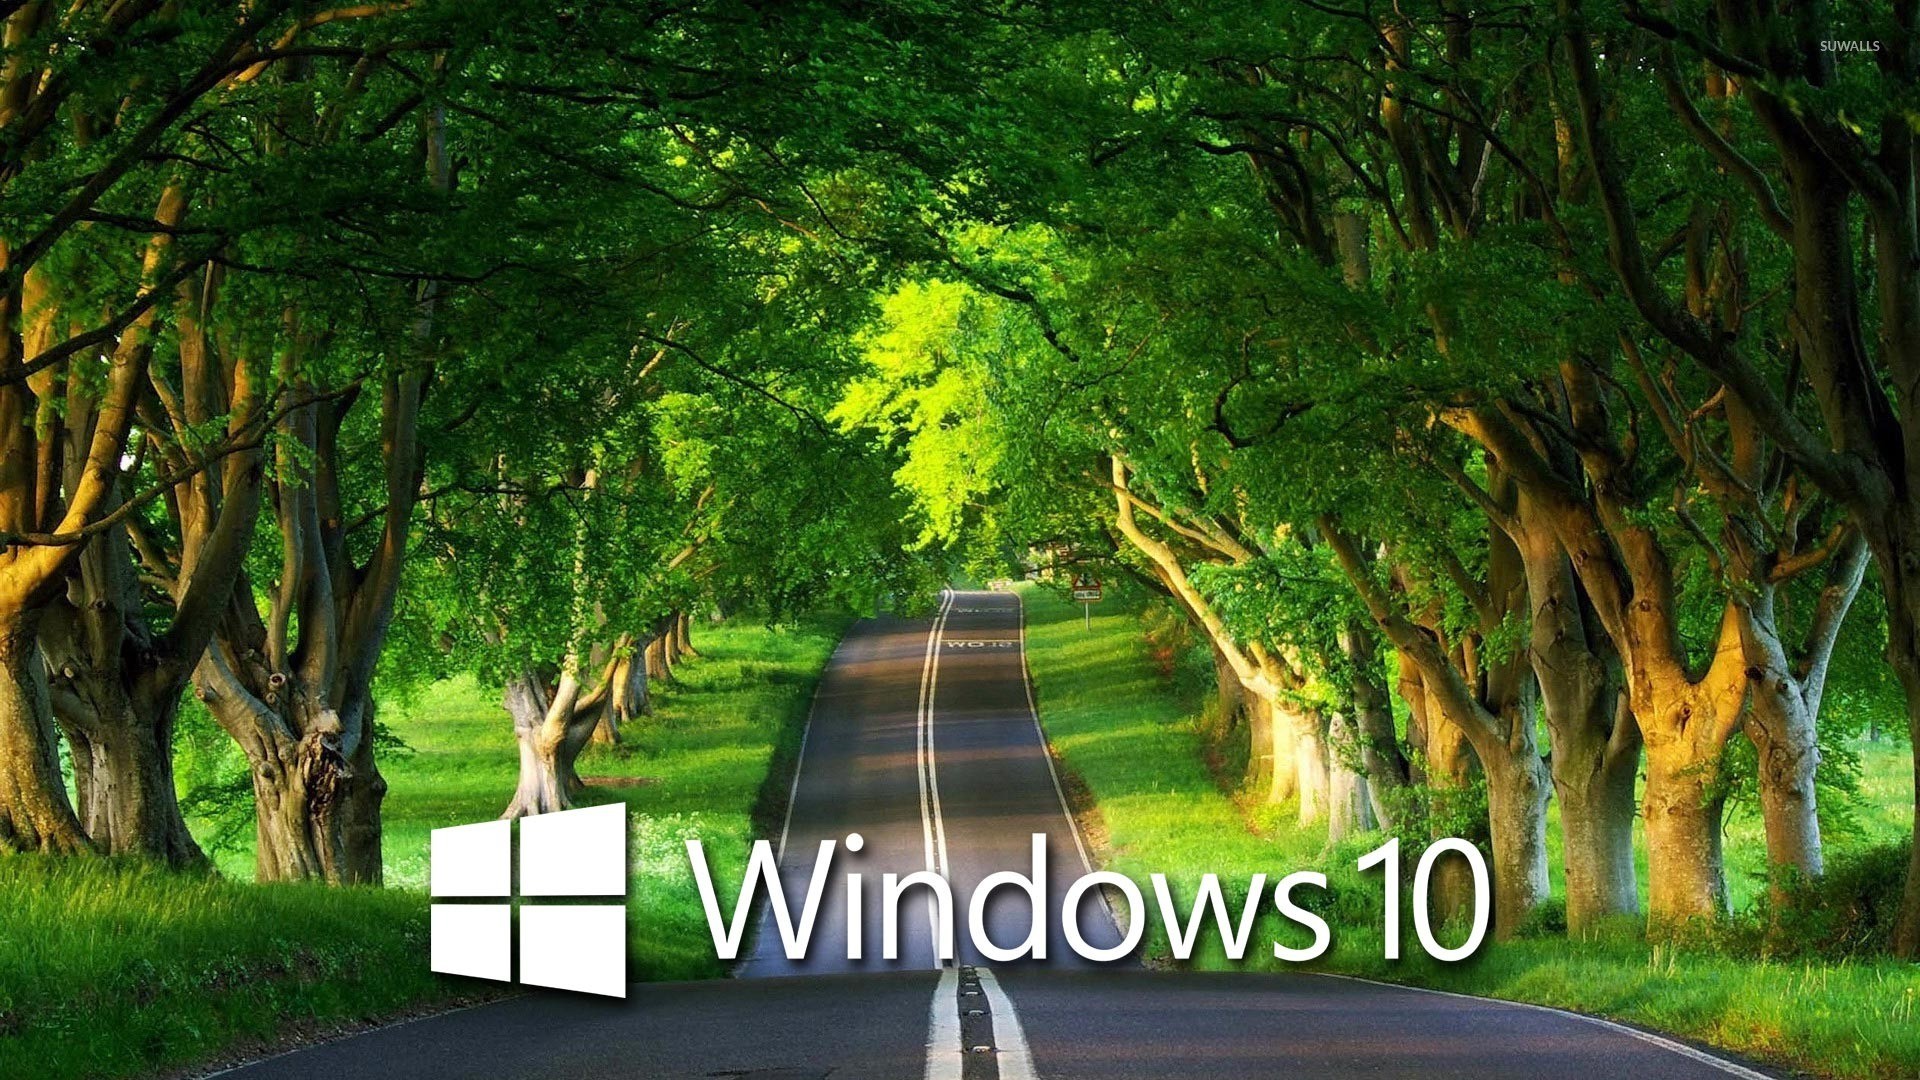 Windows 10 Wallpapers 1920x1080 (74+ images)